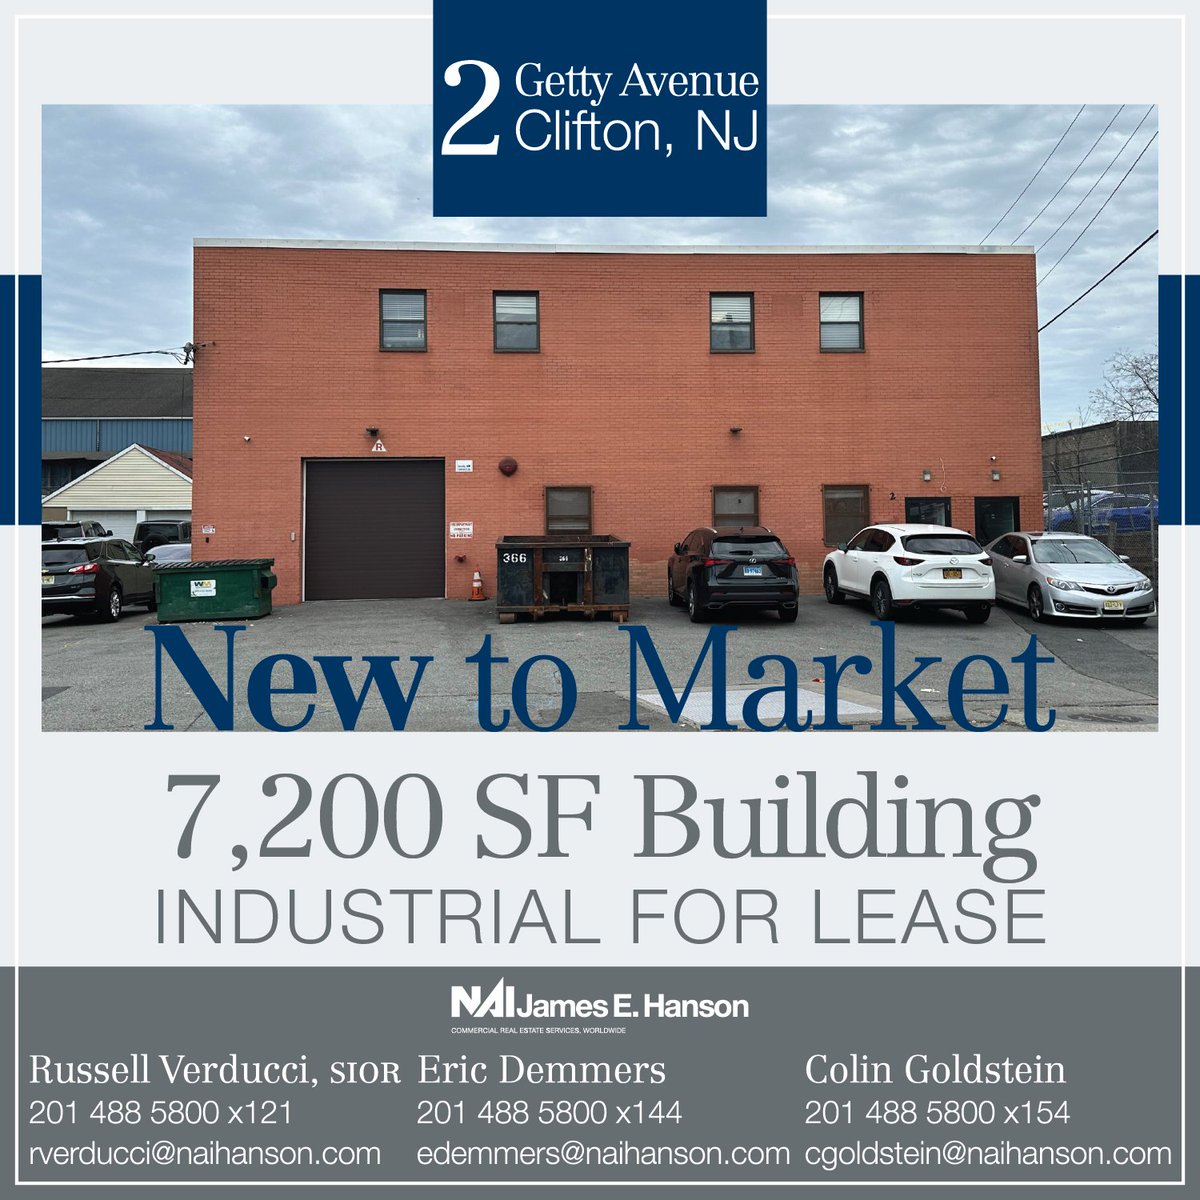 NEW! 🌟 7,200 SF #Industrial building in #CliftonNJ for lease. 2 Getty offers a 1,300 SF office, 15' ceiling height, 2 drive-ins, 9 parking spaces & more. View Brochure: bit.ly/49LQbN2 & contact Russell, Eric & Colin at #naihanson for more details!